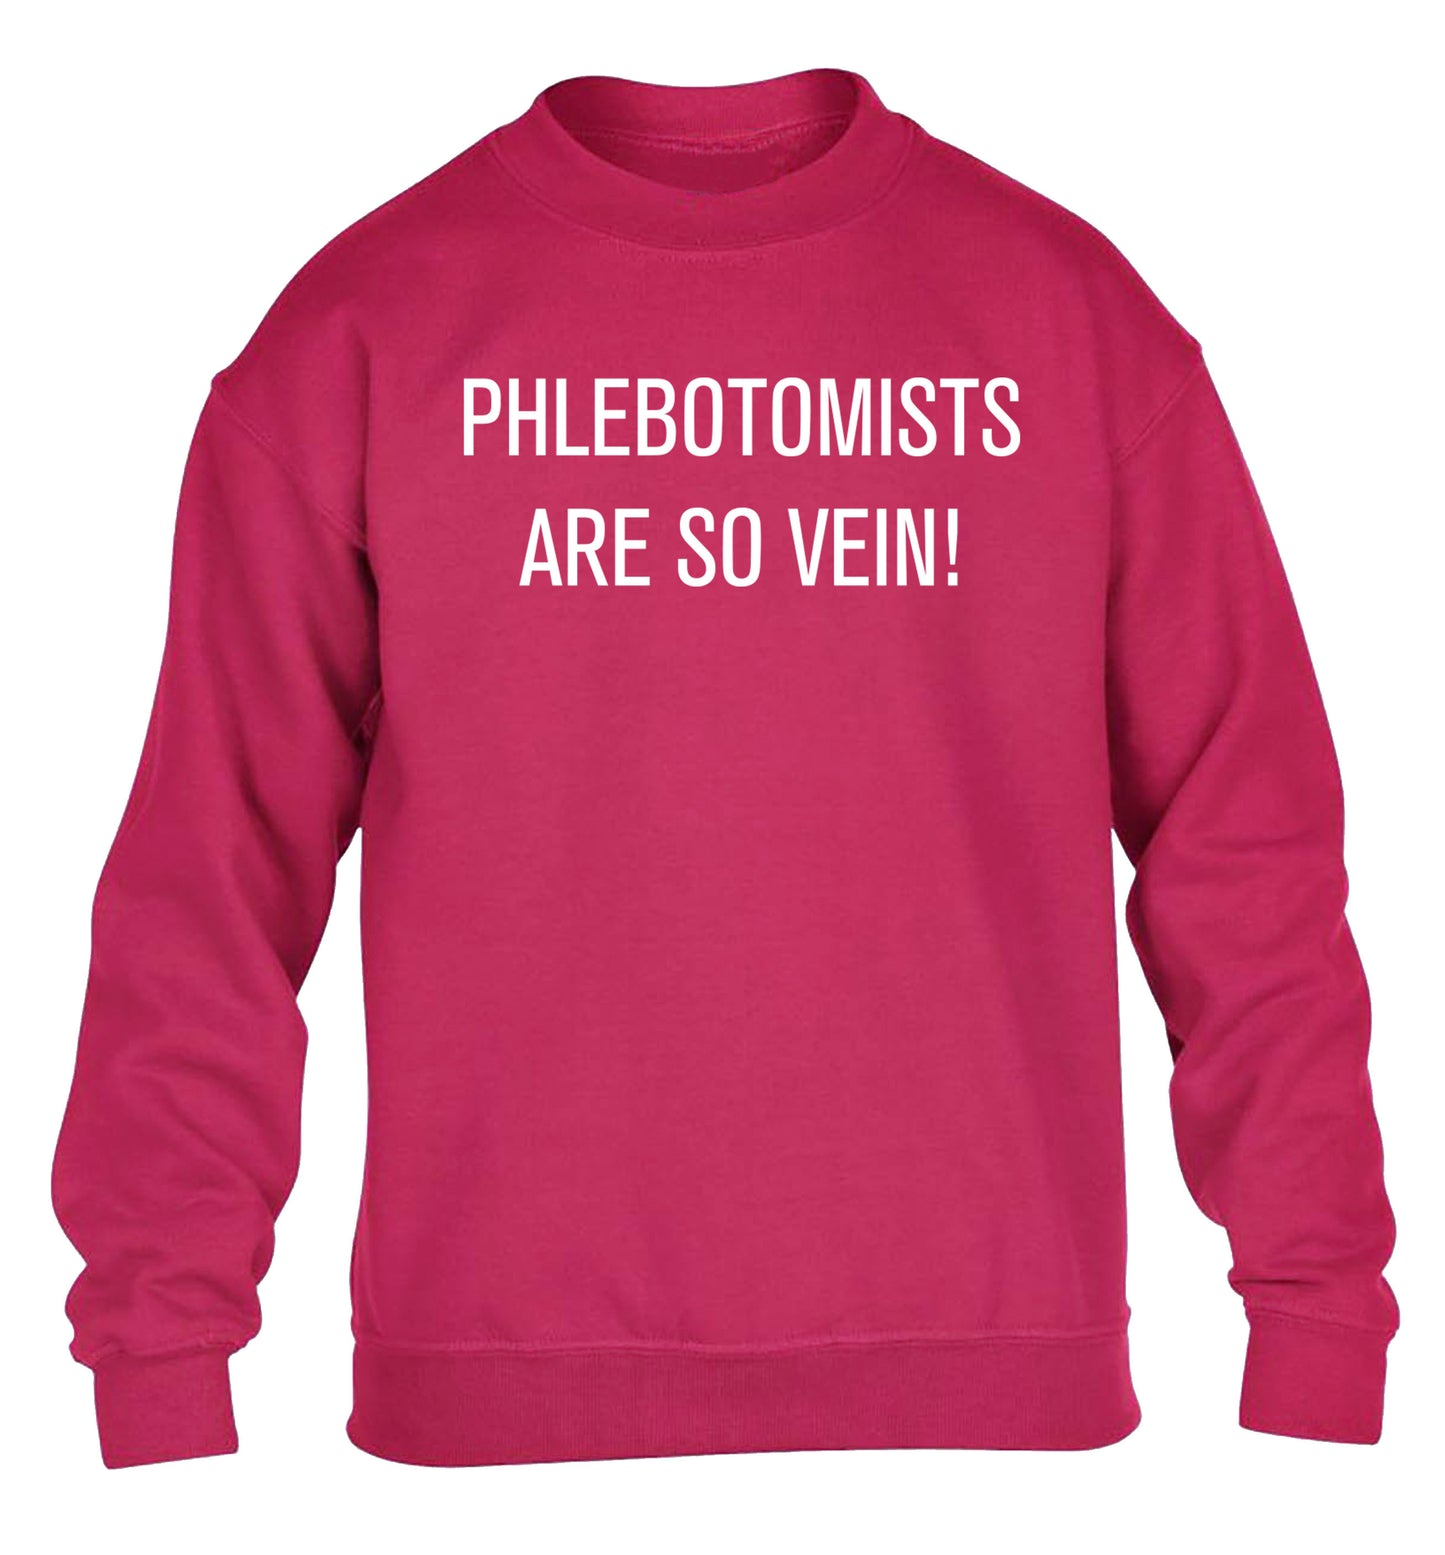 Phlebotomists are so vein! children's pink sweater 12-14 Years